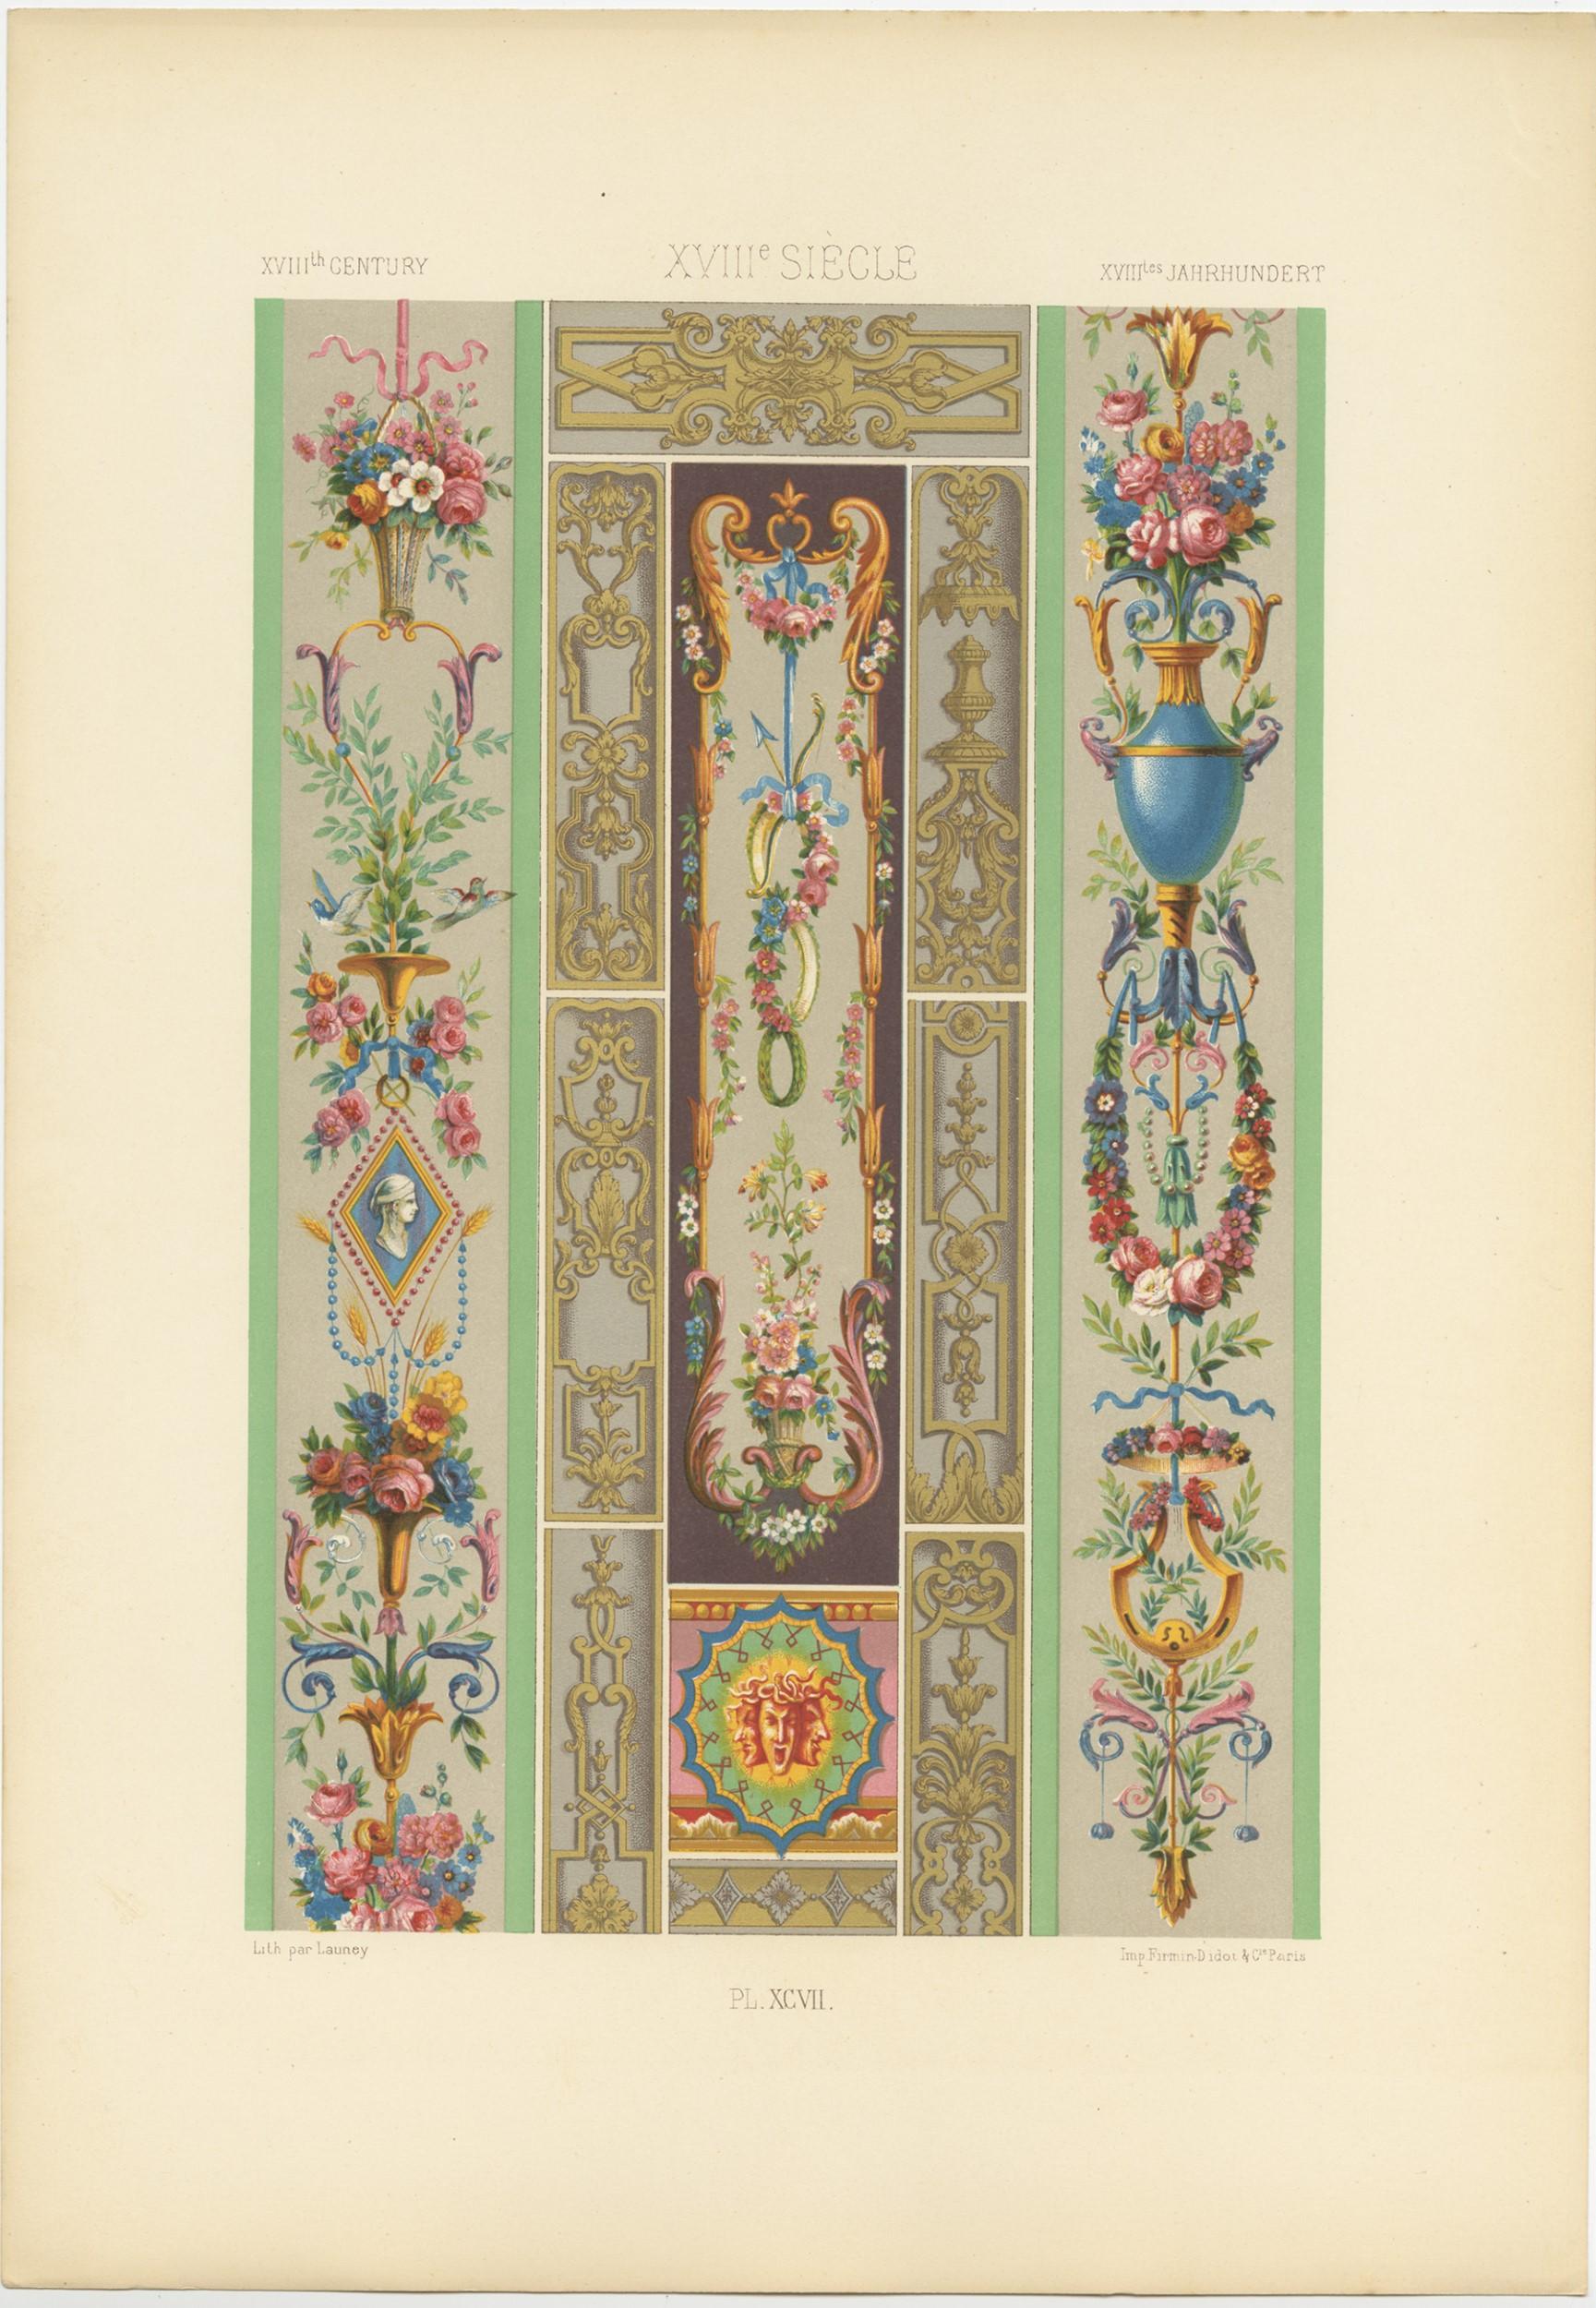 Antique print titled 'XVIIIth Century - XVIIIe Siecle - XVIIItes et Jahrhundert'. Chromolithograph of 18th century ornaments and decorative arts. This print originates from 'l'Ornement Polychrome' by Auguste Racinet. Published, circa 1890.